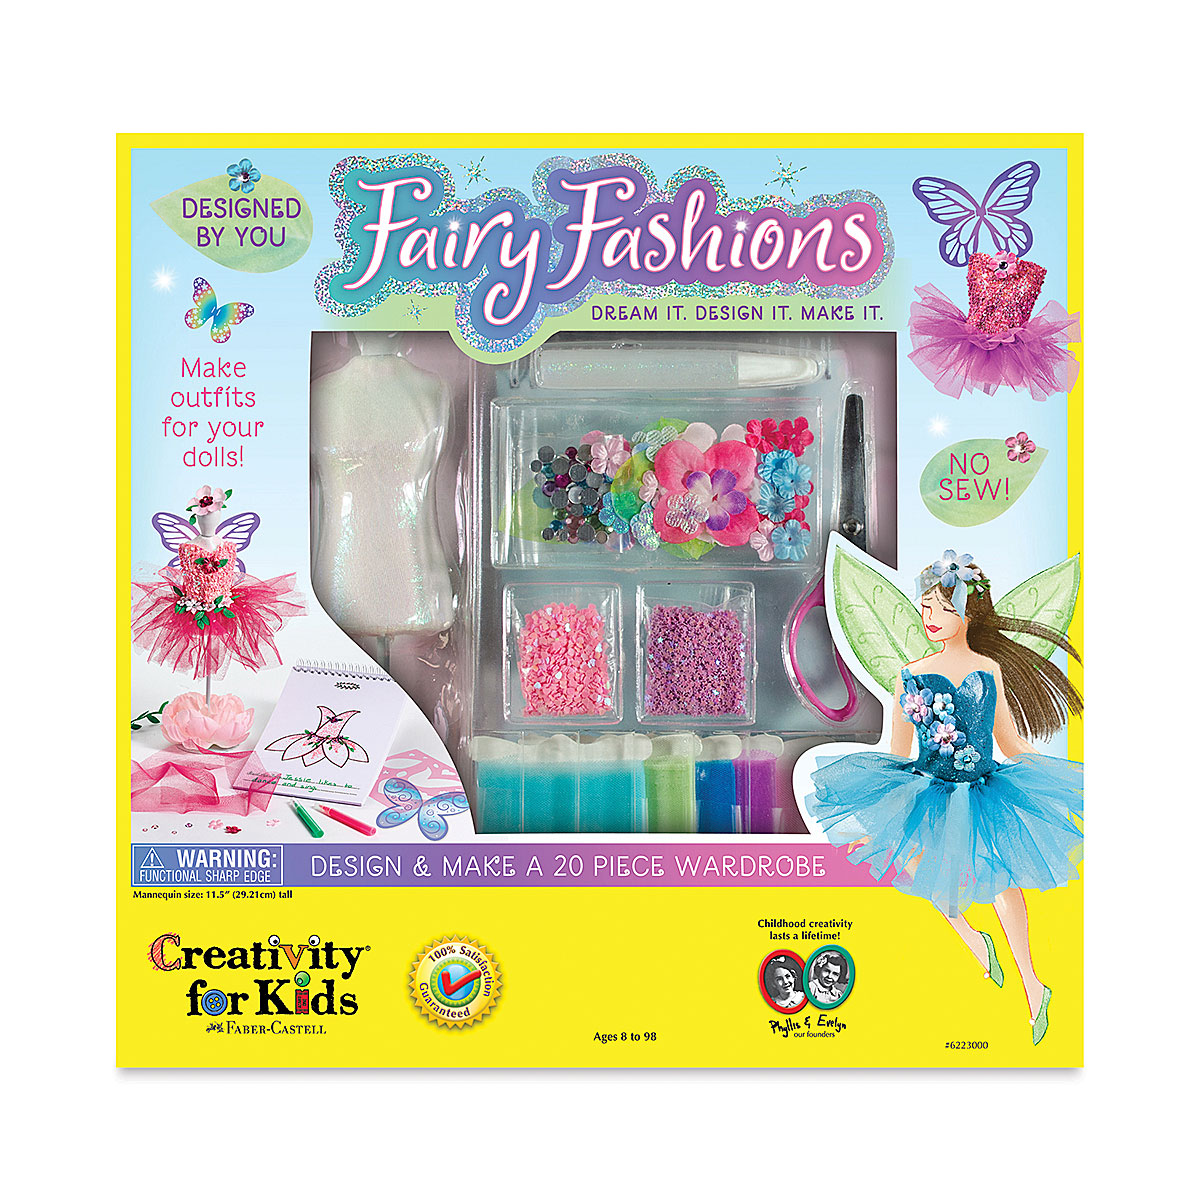 Creativity For Kids Designed By You Fashion Studio : Target